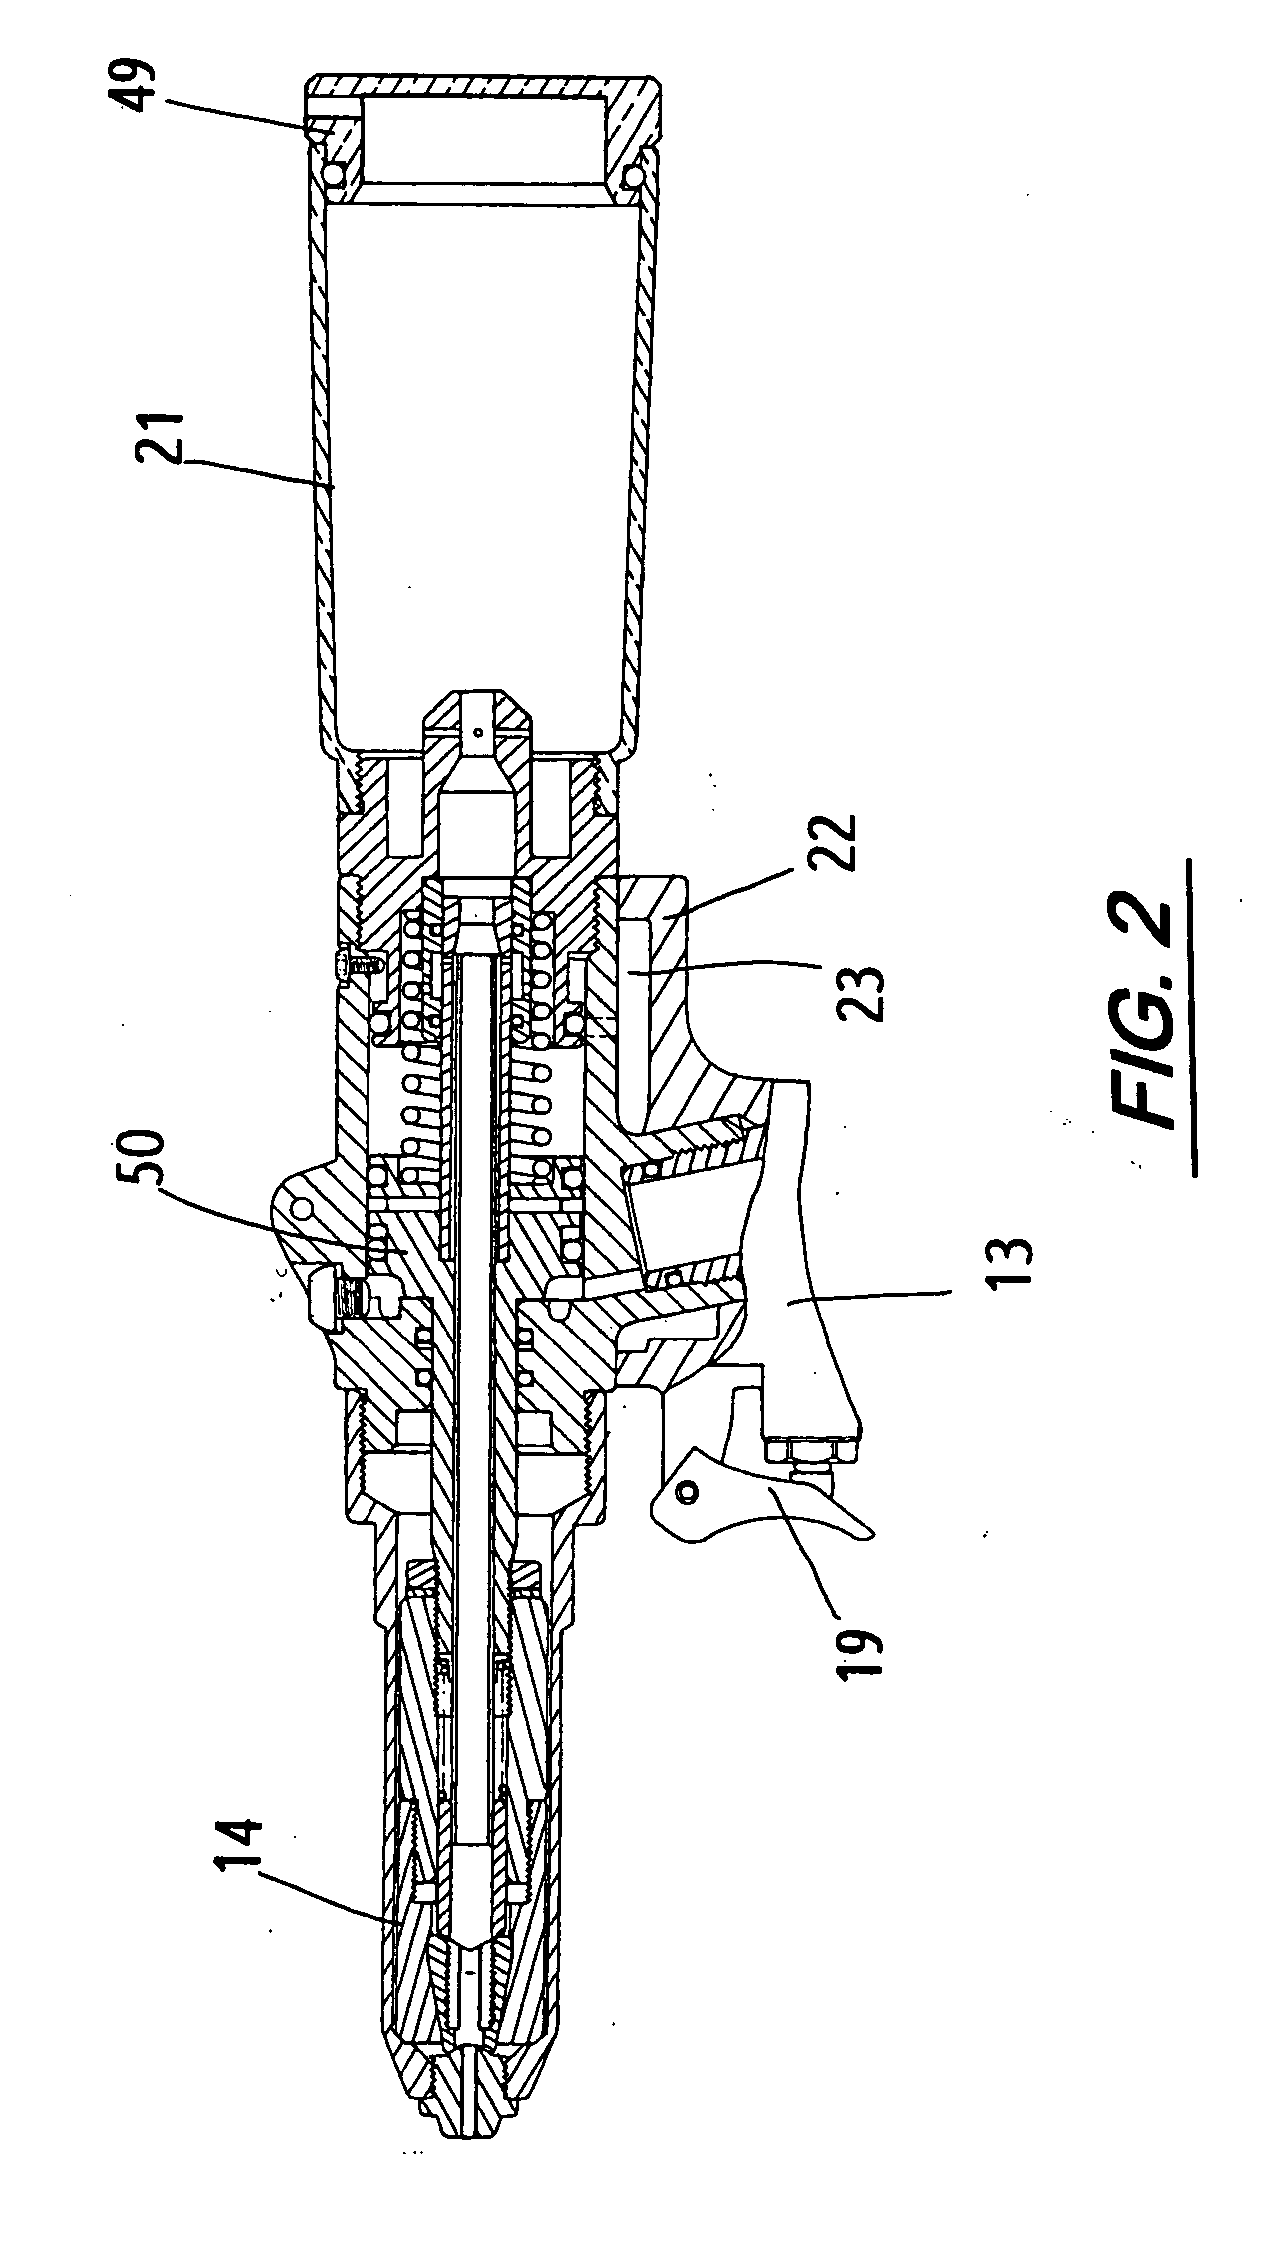 Automatic suction and repelling device for rivet gun